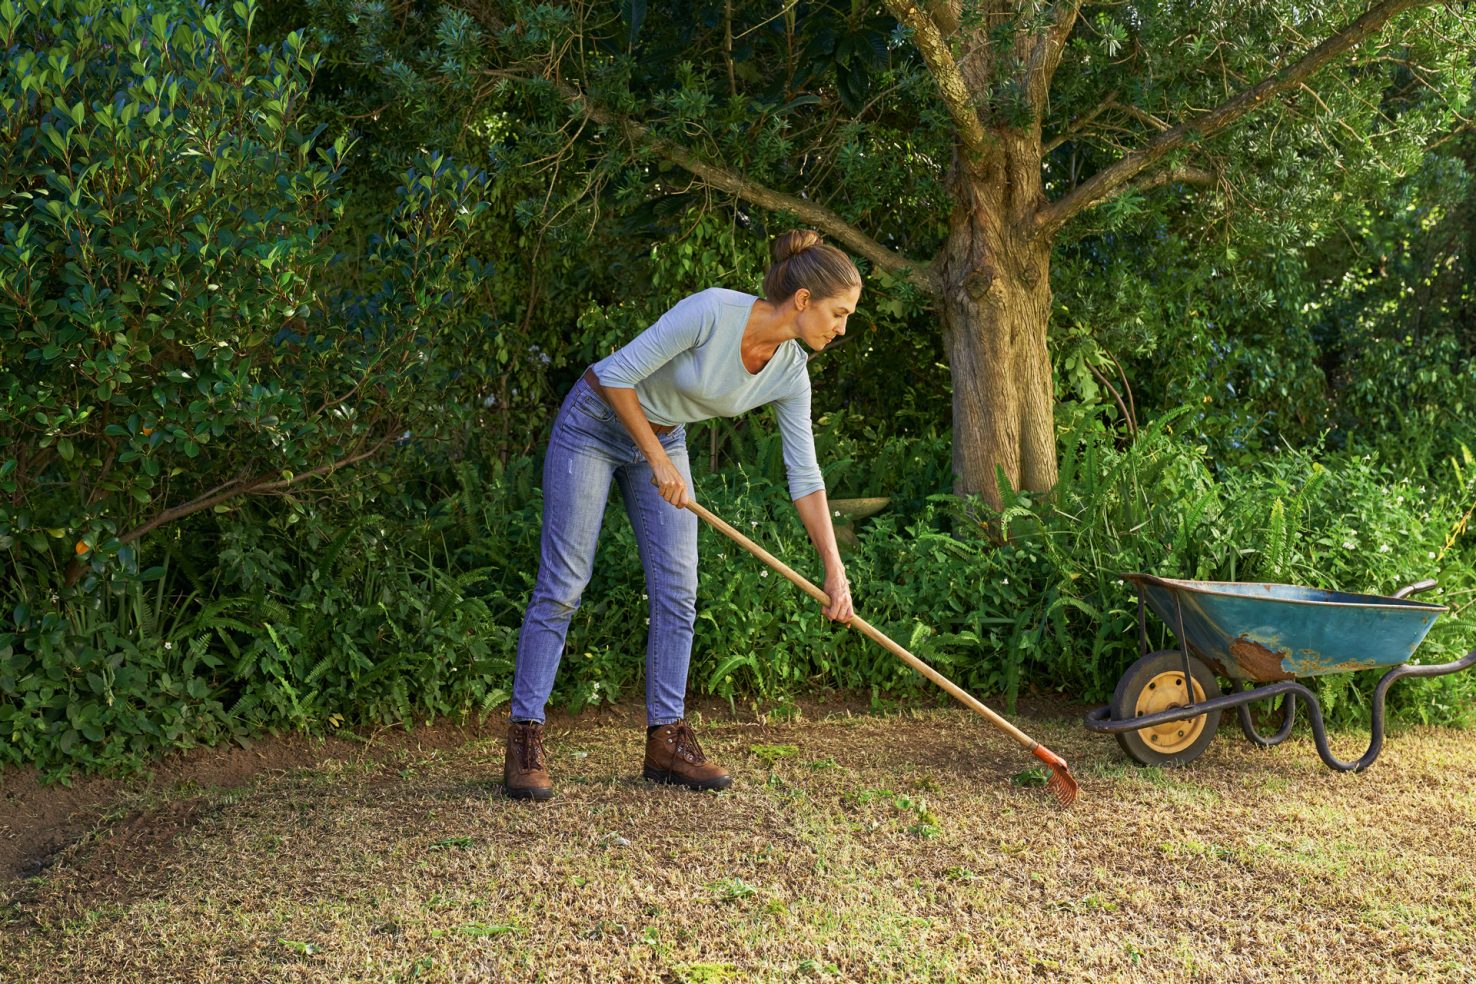 To renew the lawn, a woman scrapes weeds out of the ground with a rake. 